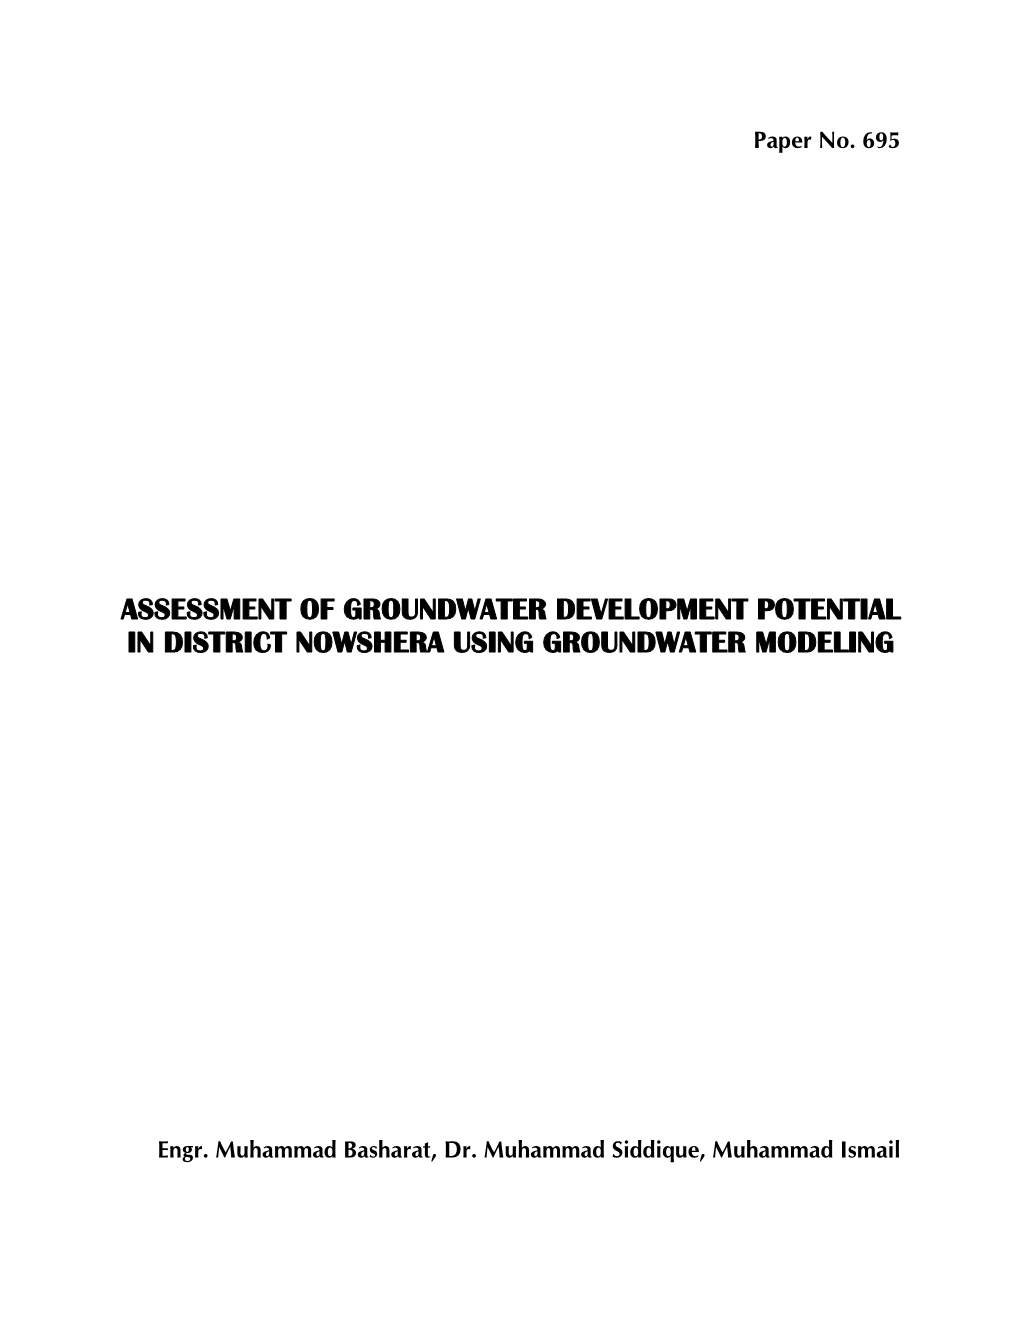 Assessment of Groundwater Development Potential in District Nowshera Using Groundwater Modeling